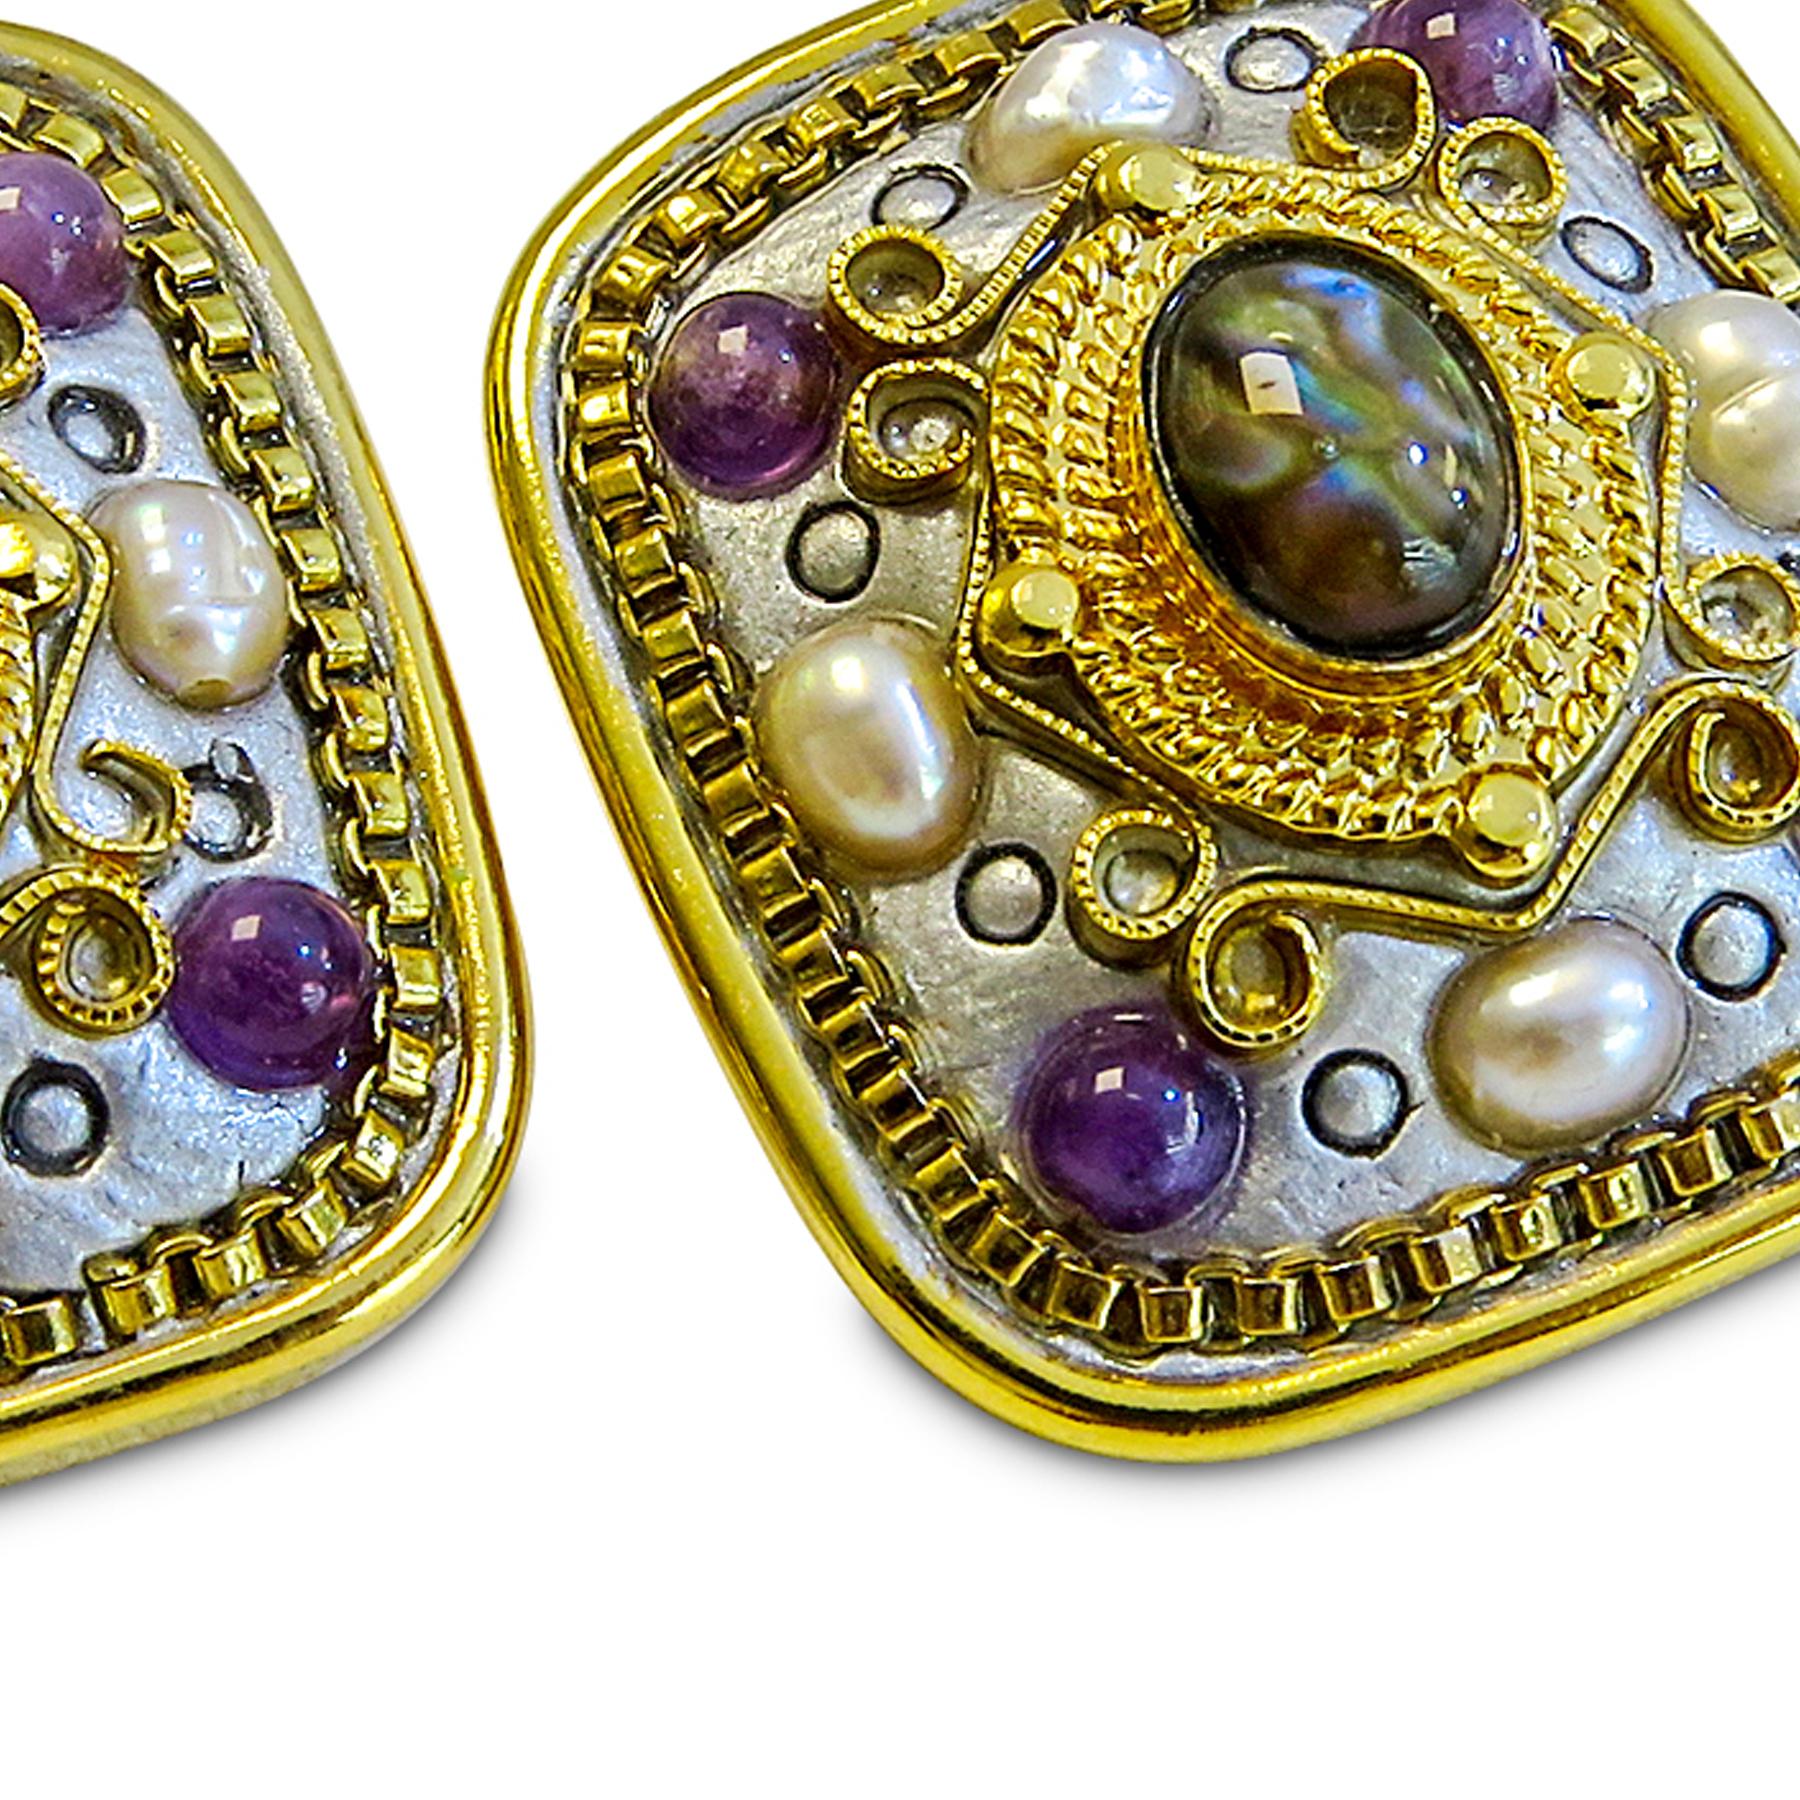 These mesmerizing Michal Golan earrings feature amethyst, pearl, and labradorite centers with an 18 Karat gold plated accent. It is 25mm by 22 mm in dimension and weighs 13.5 grams to sit flush with the ear for maximum comfort.
